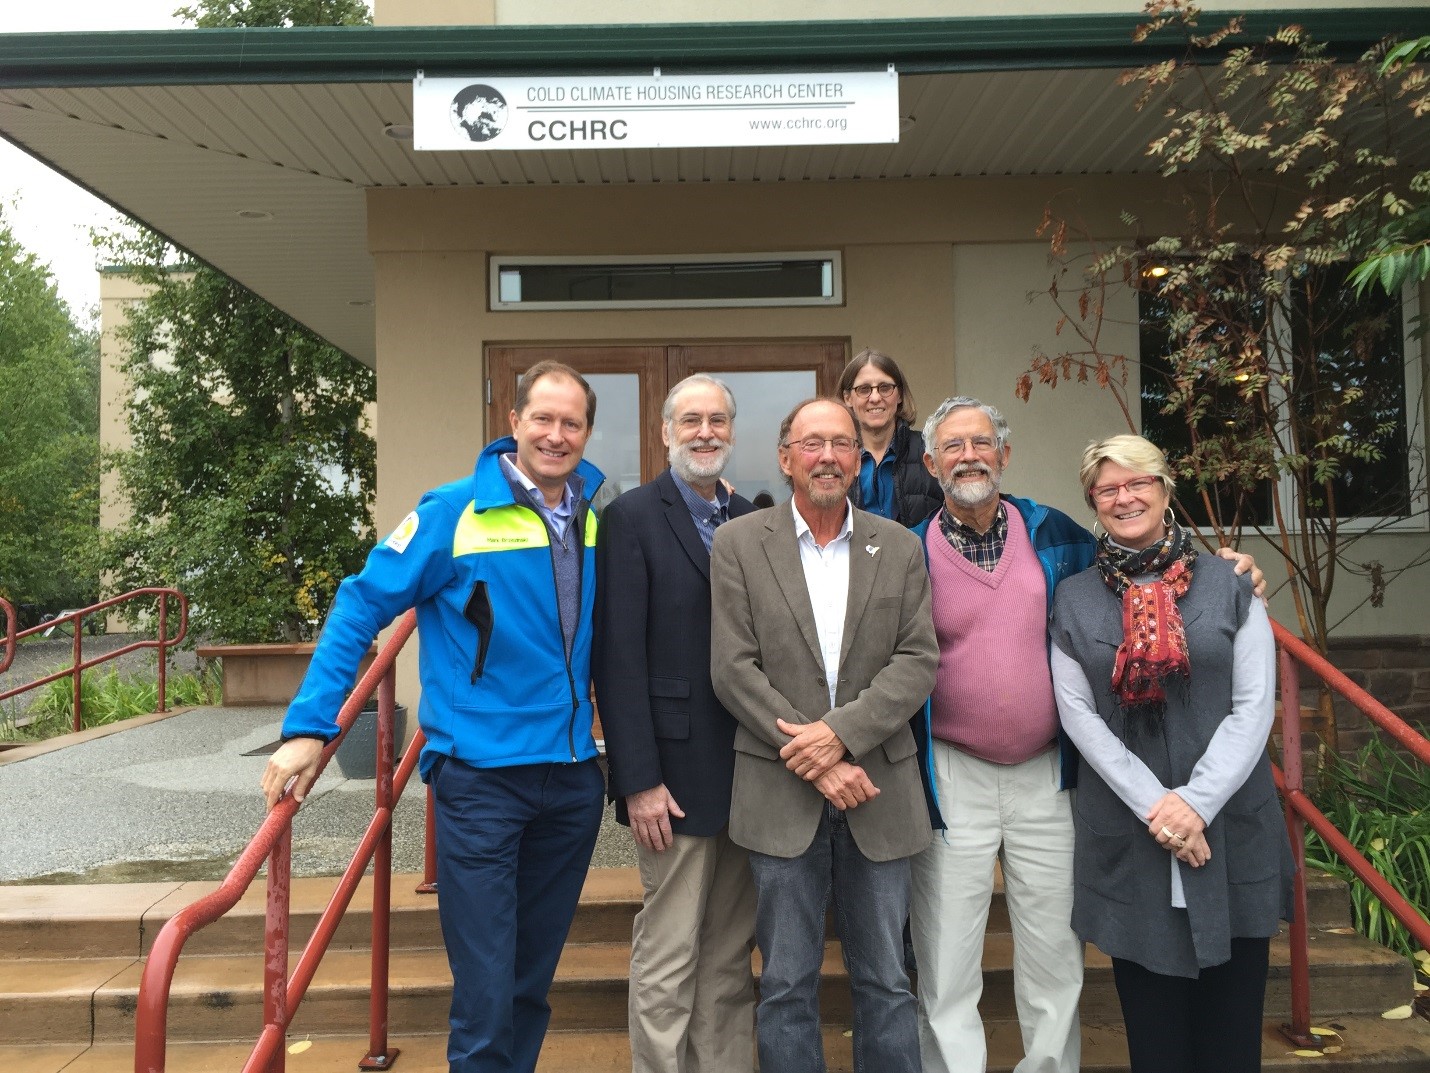 Senior OSTP officials at the Cold Climate Housing Research Center